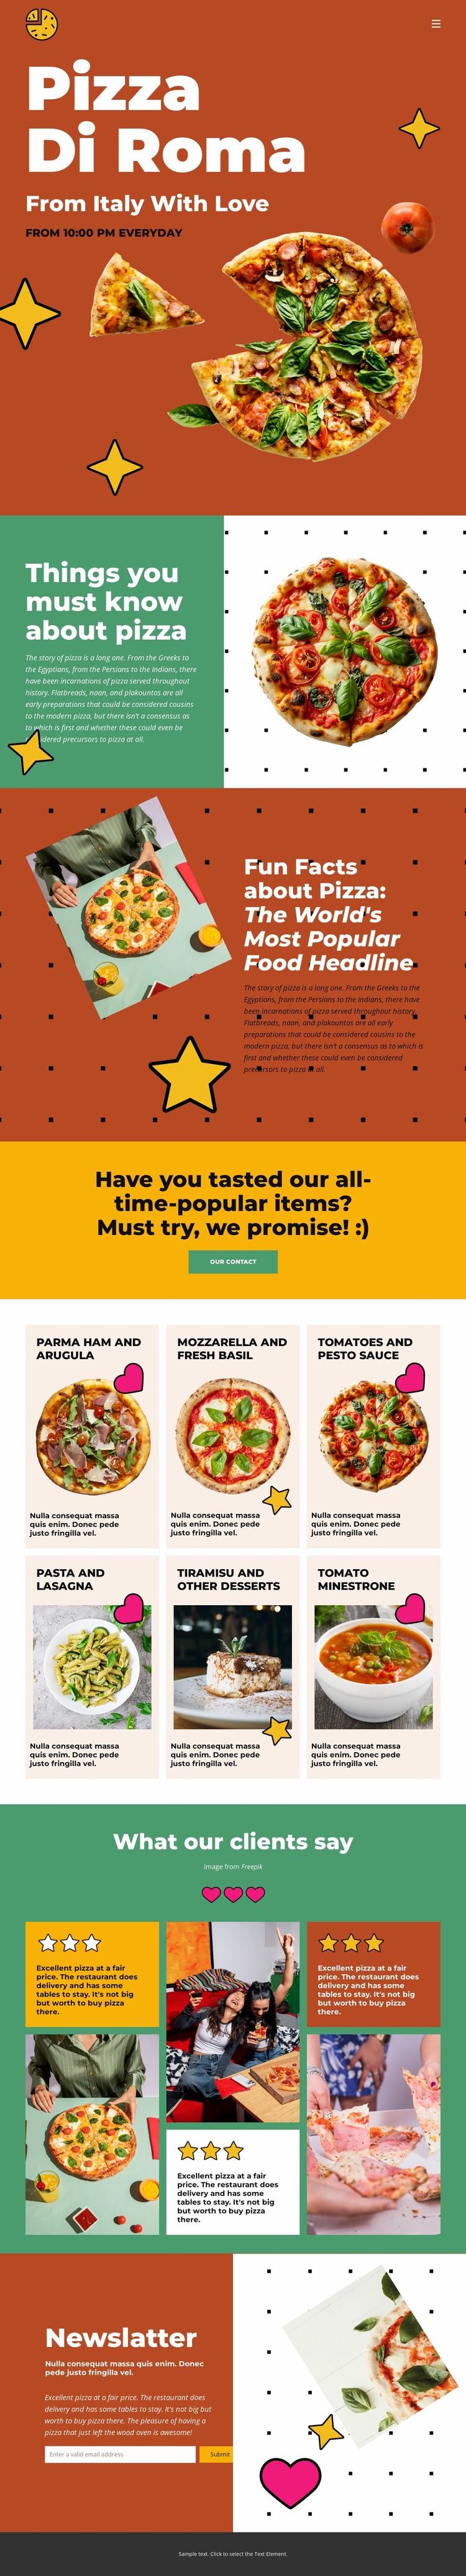 Things you must know about pizza Website Mockup